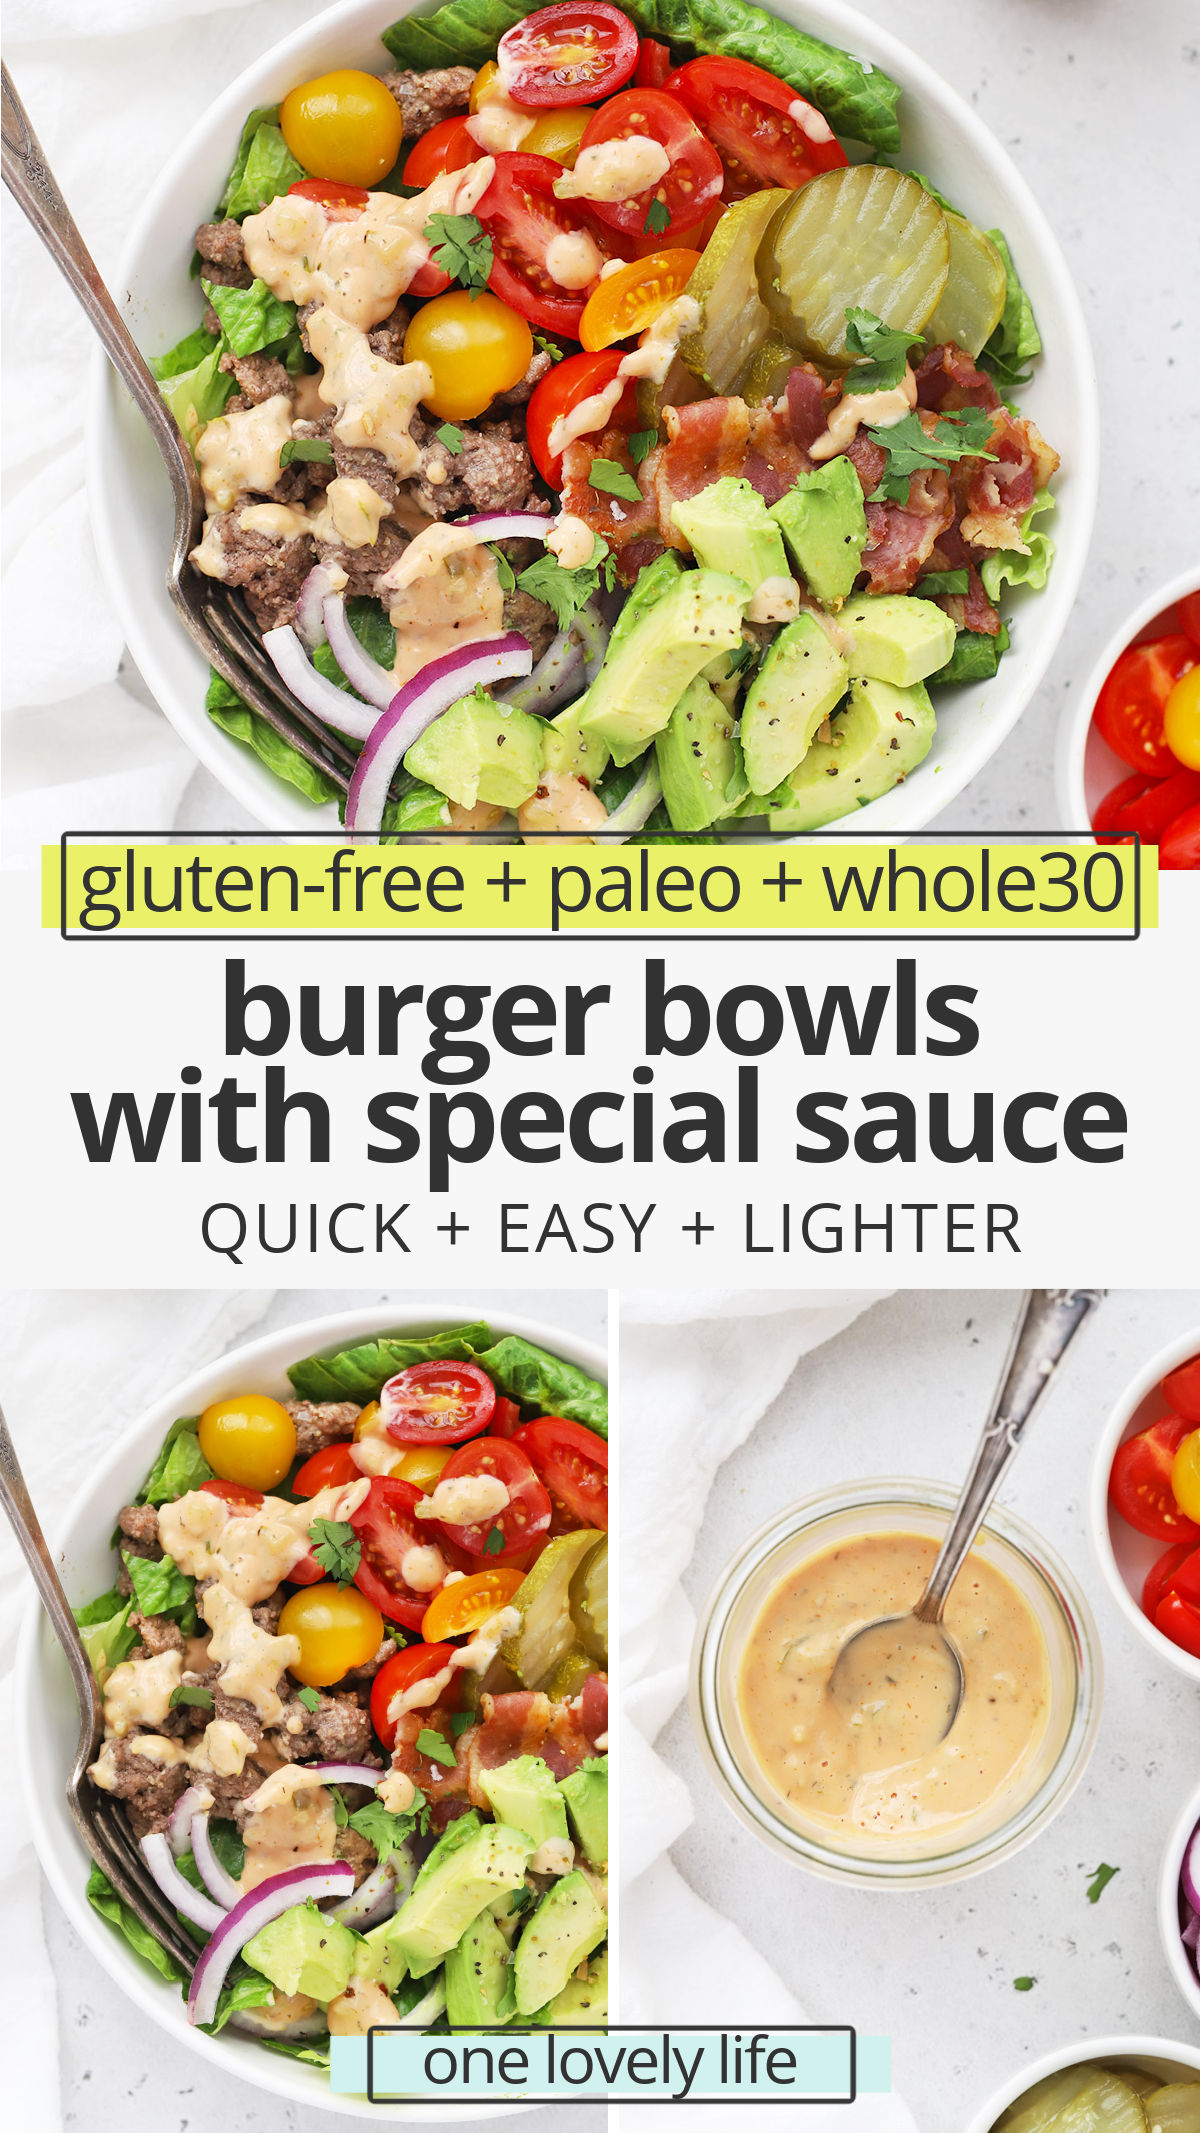 Burger Bowls with Special Sauce - Load all your favorite hamburger toppings onto a bed of greens and drizzle with our favorite special sauce to build an amazing burger salad. (Gluten-Free, Paleo & Whole30-Friendly) // Whole30 Burger Bowls // Special Sauce for Burgers // Paleo Burger Bowl // Burger Salad #paleo #glutenfree #whole30